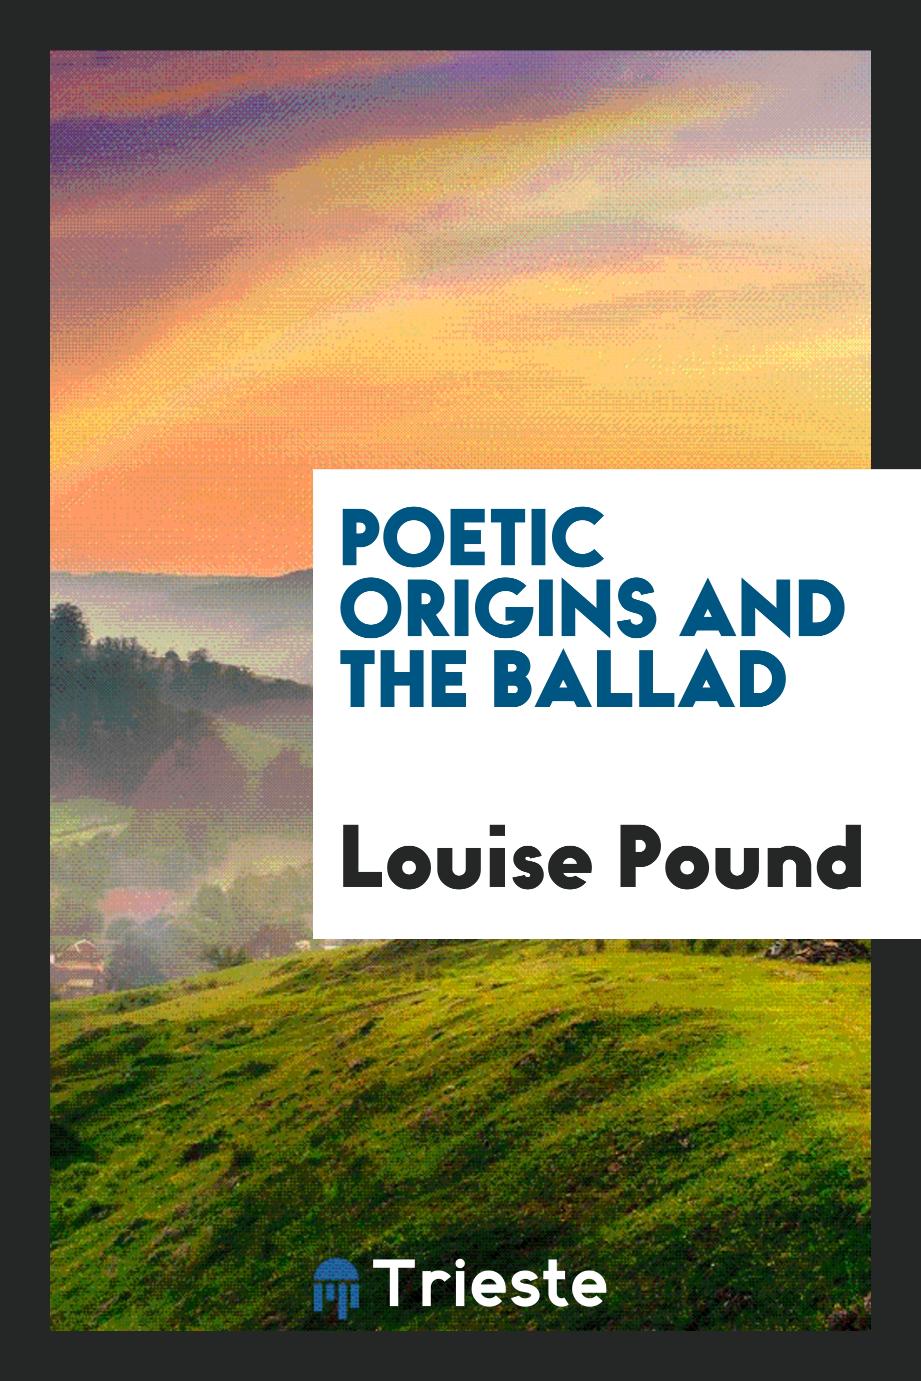 Poetic origins and the ballad